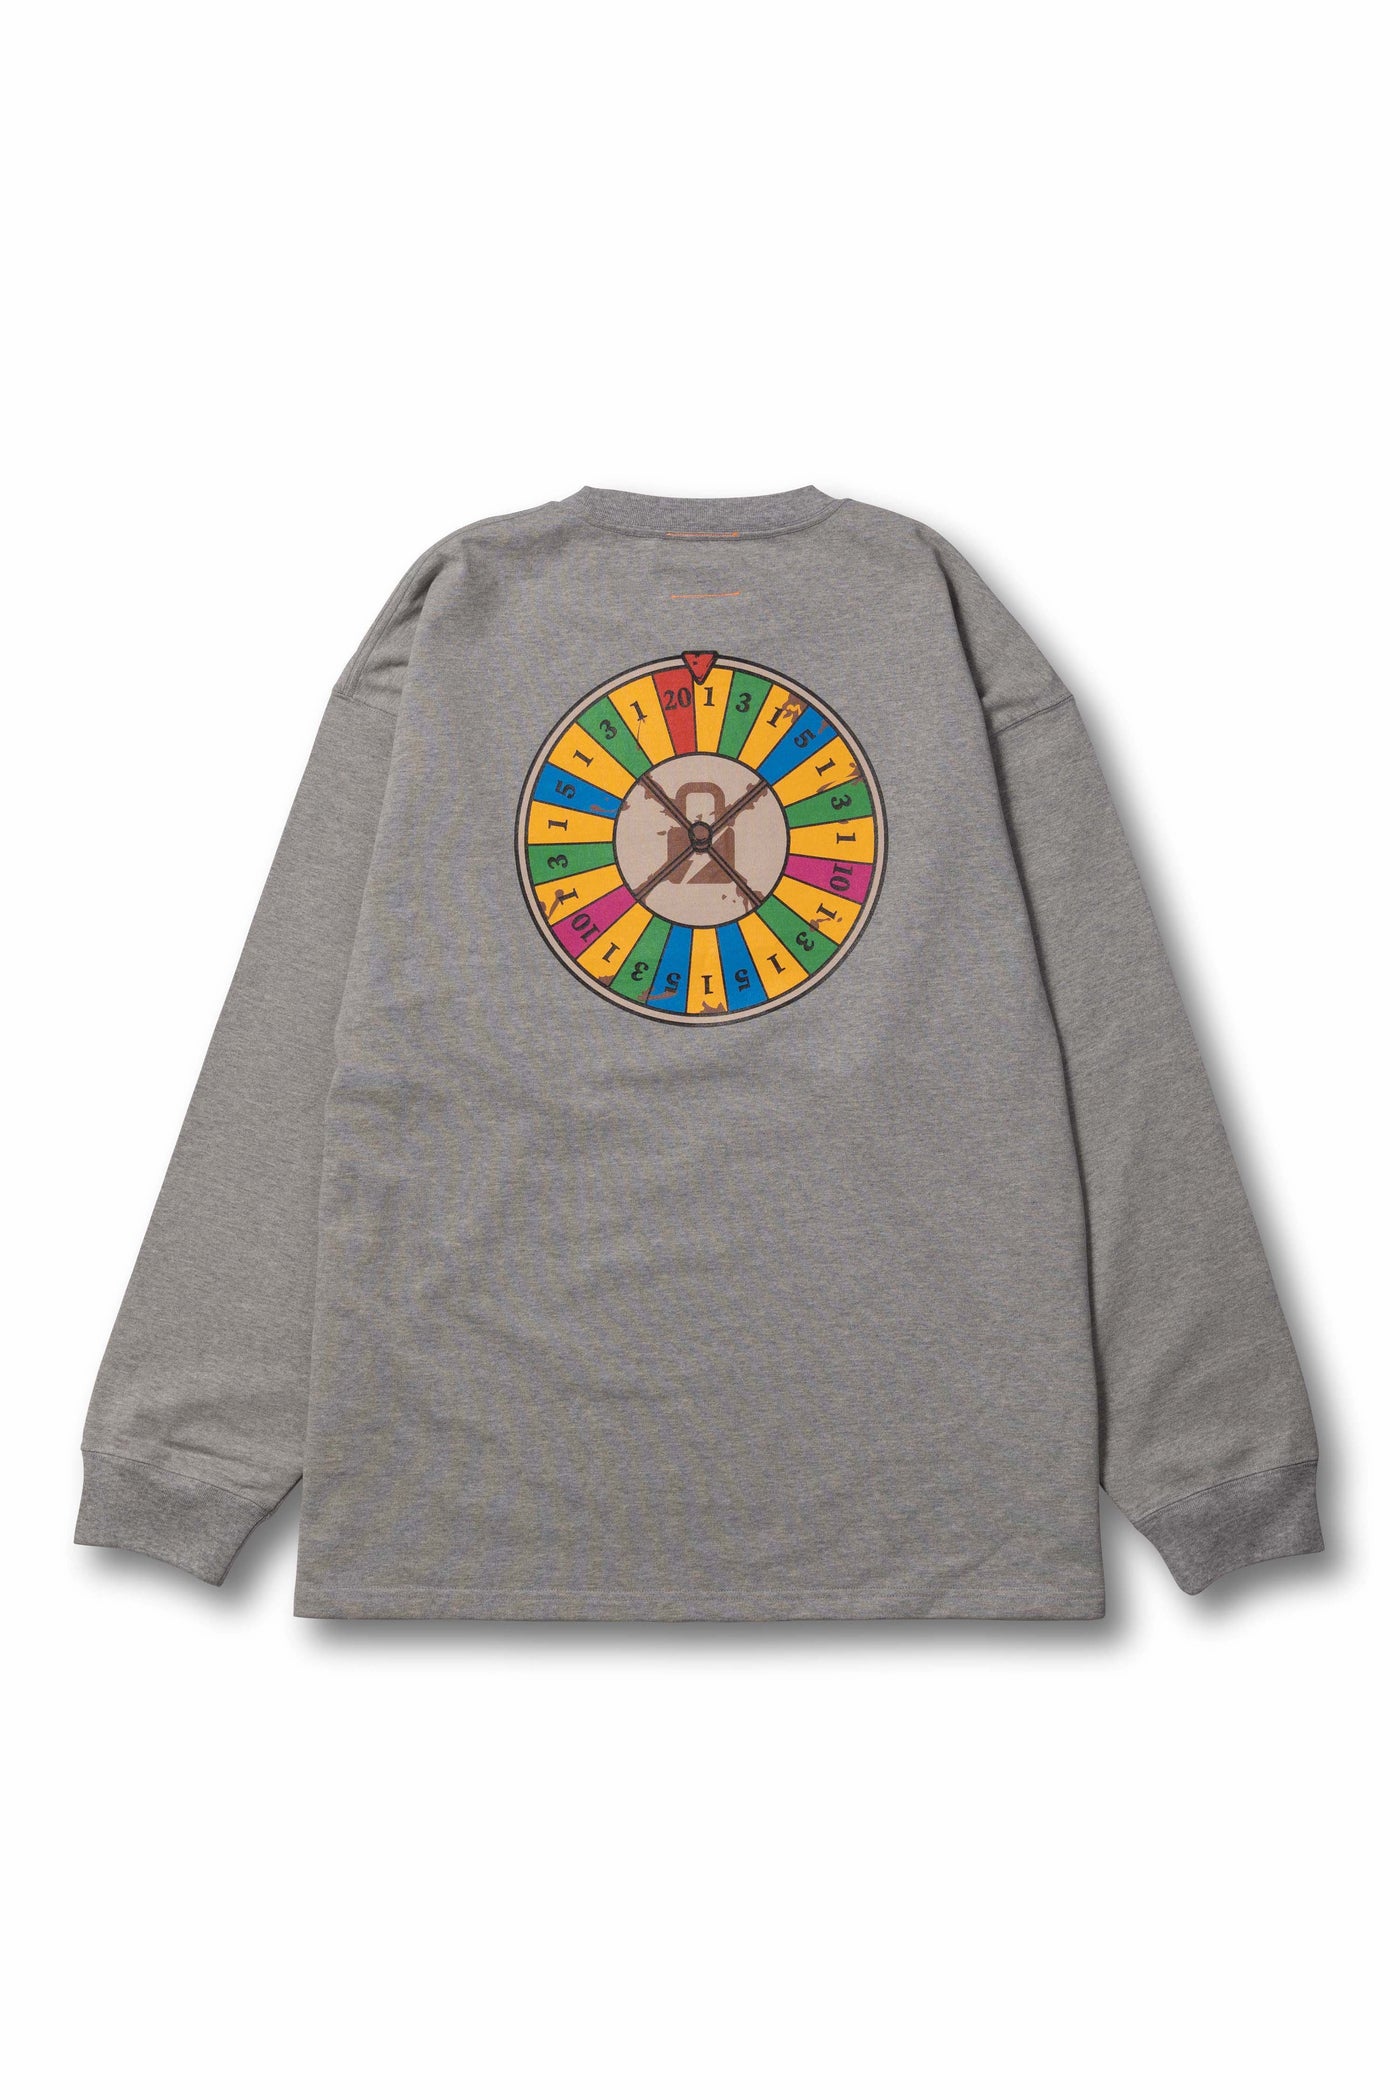 ROULETTE BIG L/S TEE / GRY